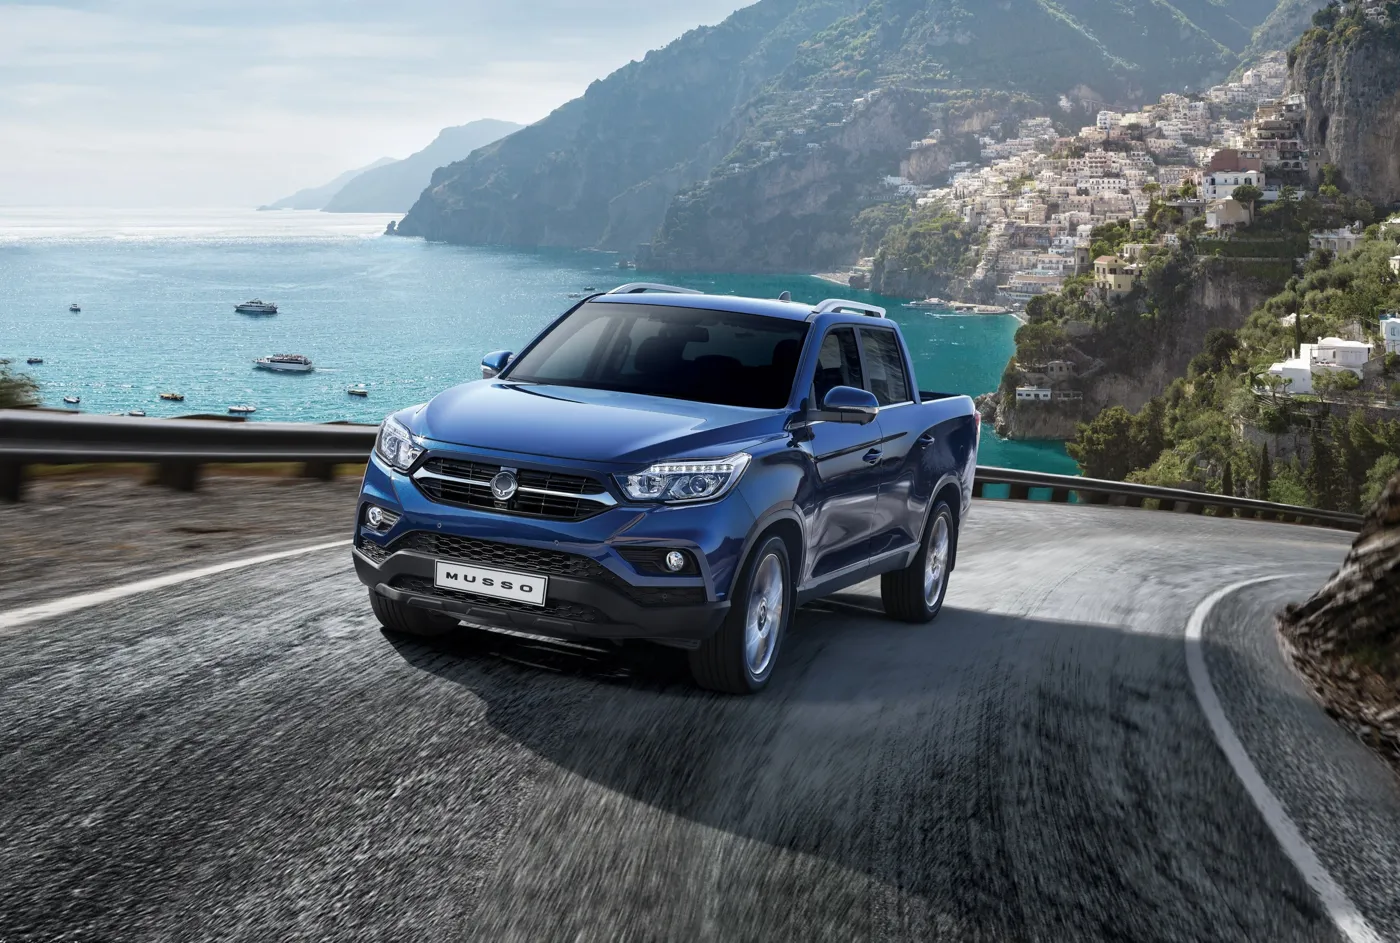 2020 SsangYong Musso EX review